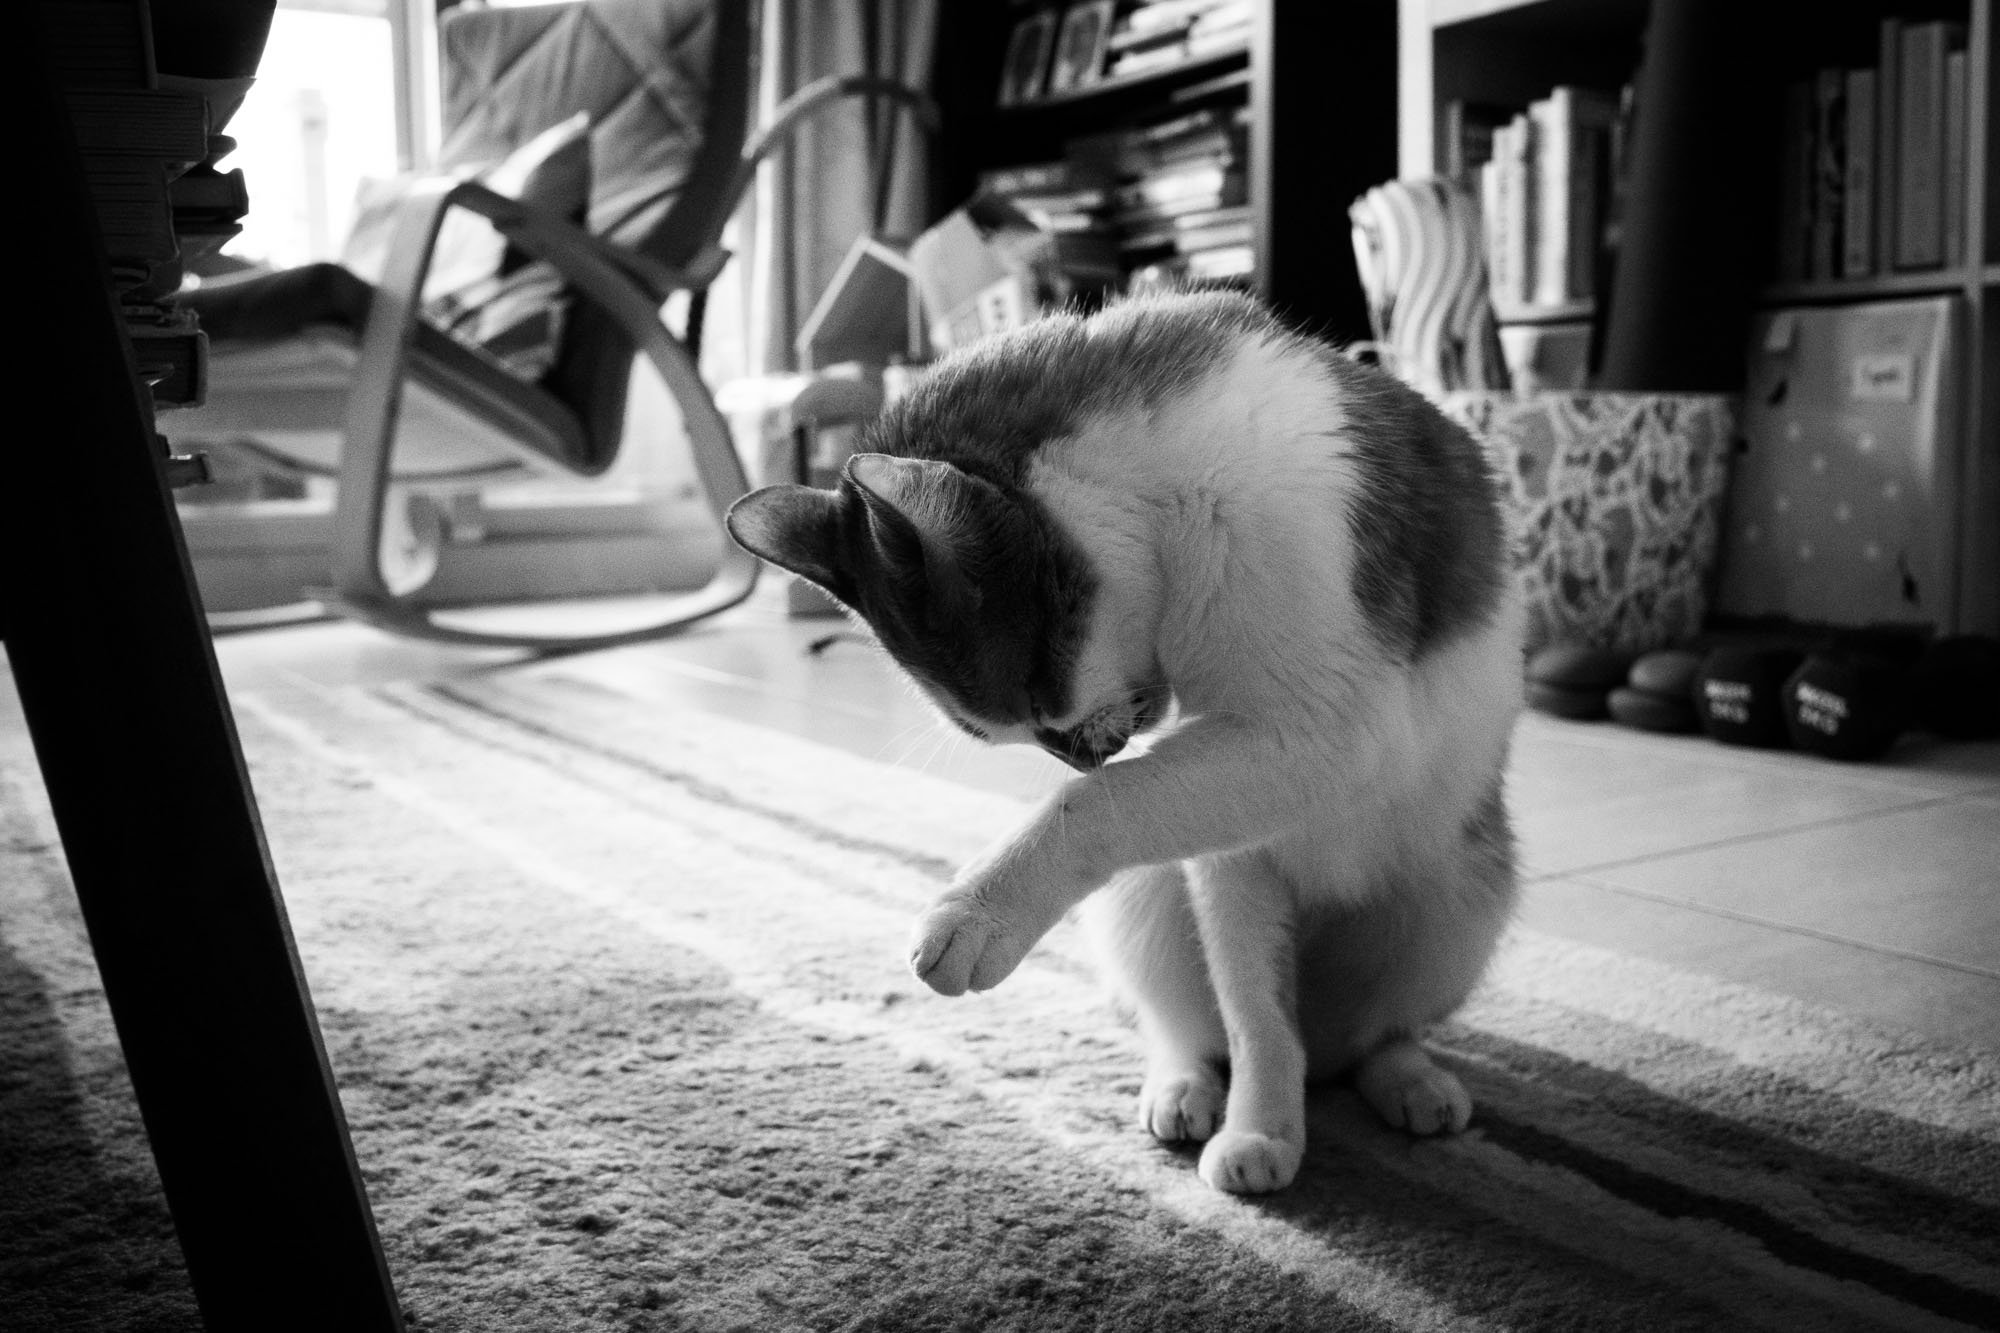 A cat licks its paw in a sunny living room in Taipei.